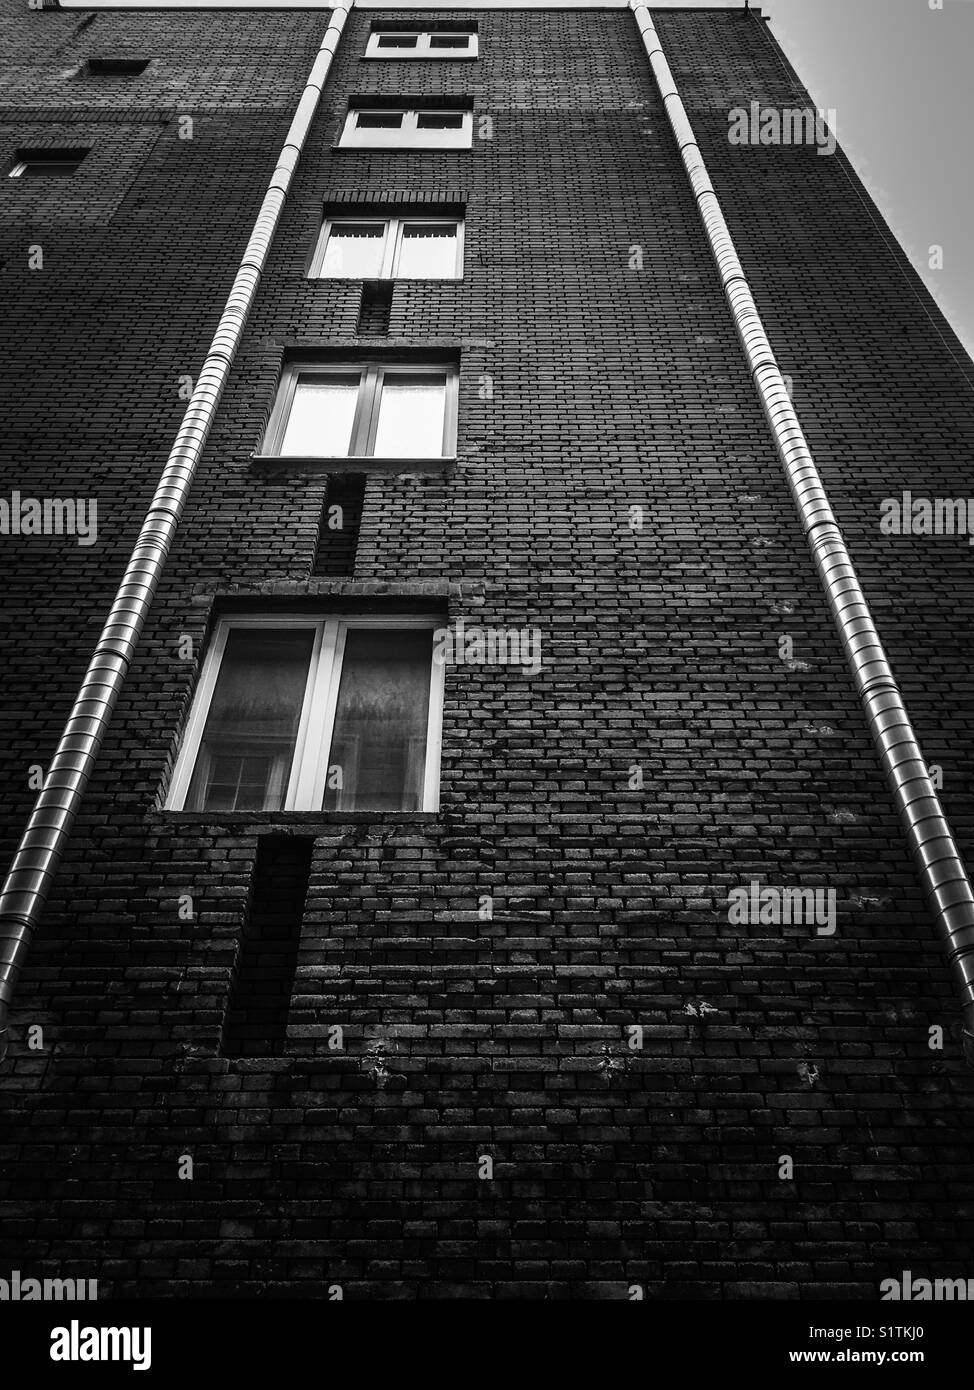 A brick wall with windows and shiny downpipes Stock Photo